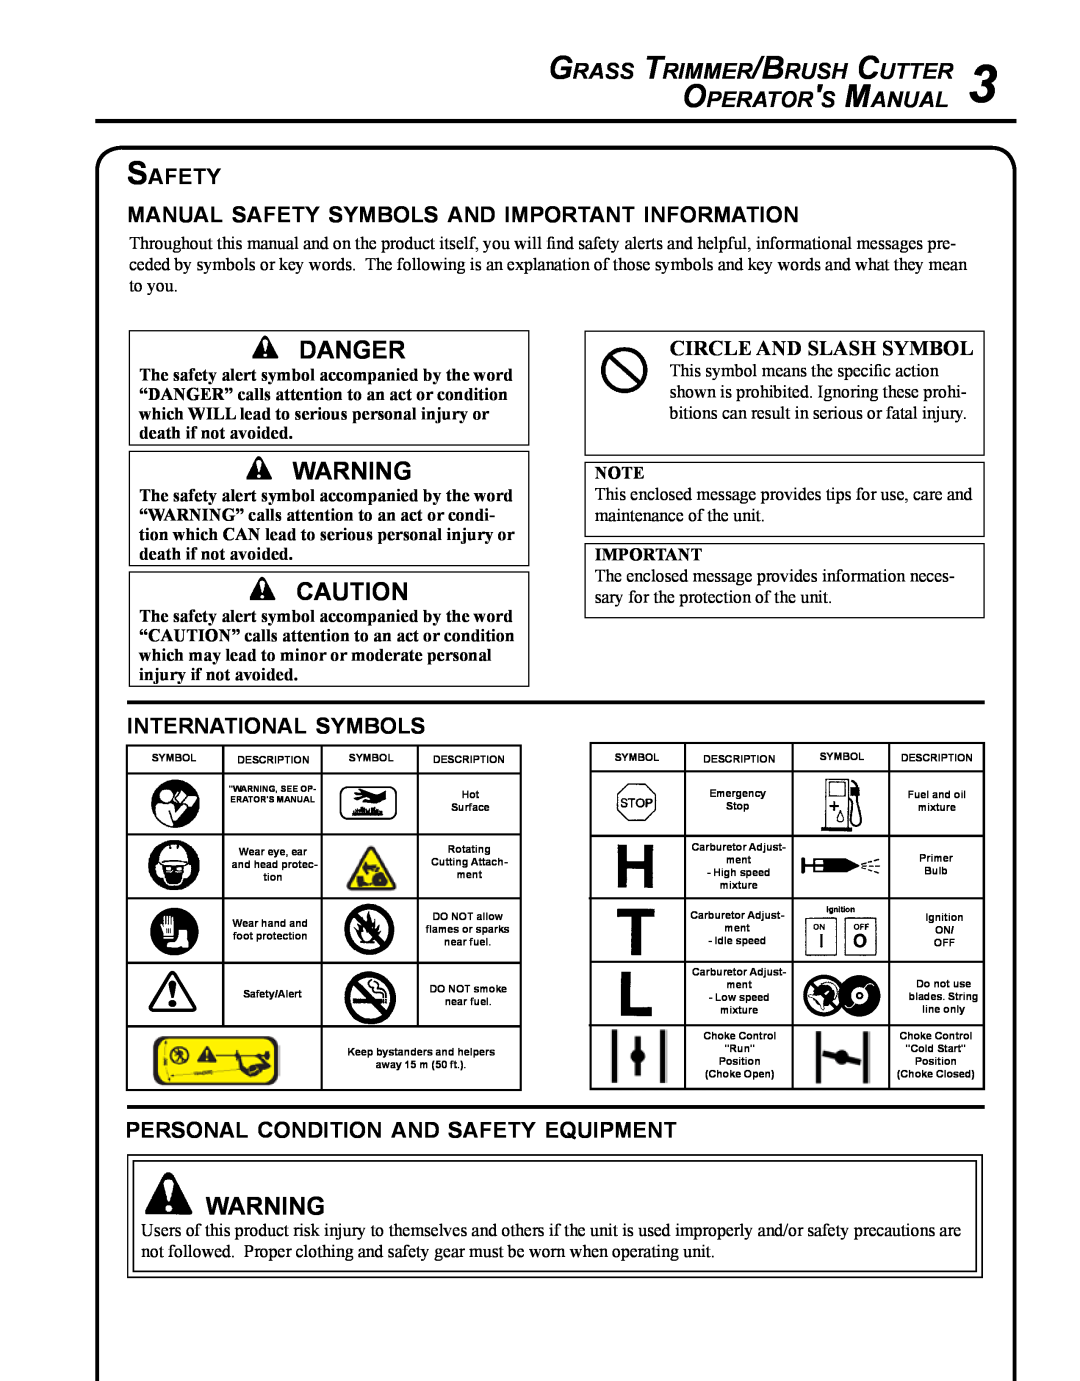 Echo SRM-280S Danger, Grass Trimmer/Brush Cutter Operators Manual, Safety, manual safety symbols and important information 